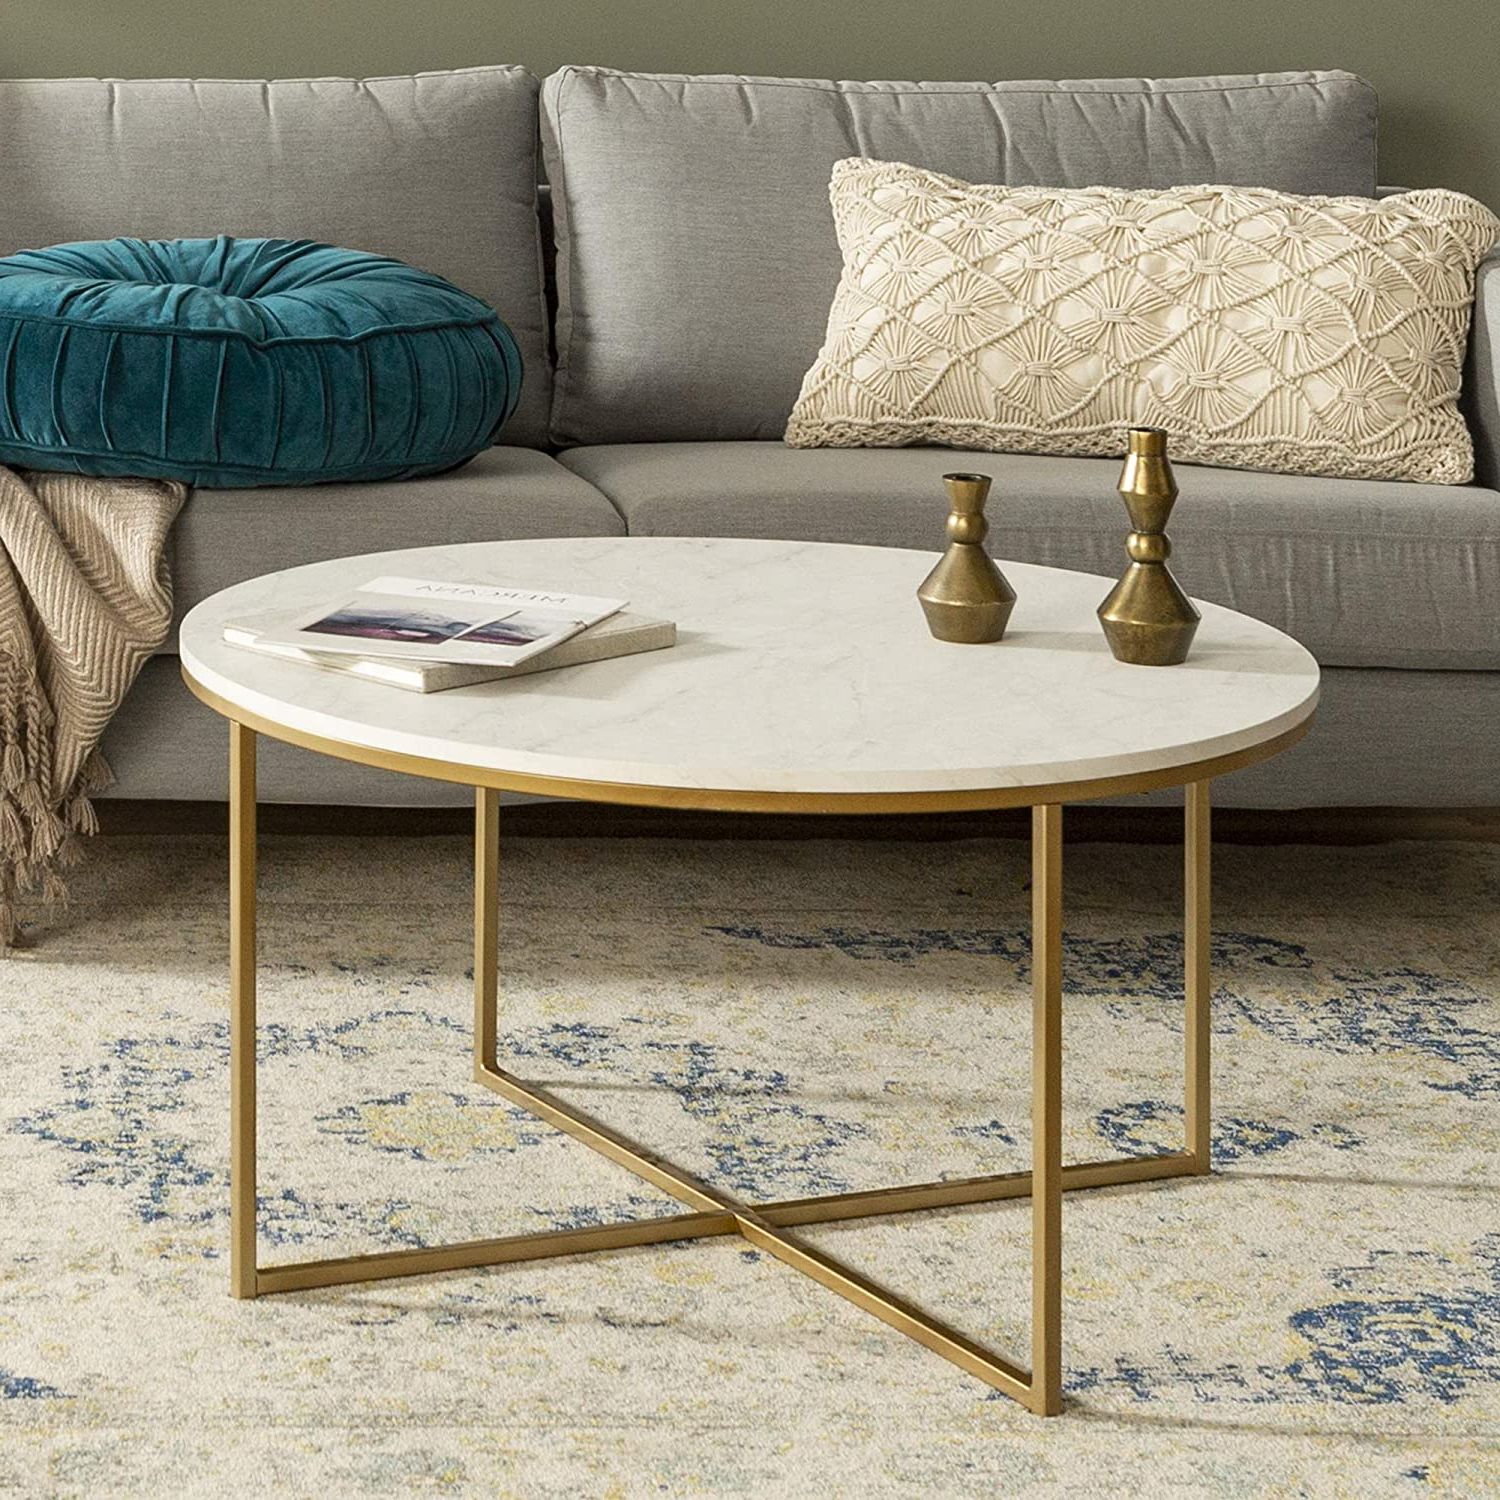 Eden Bridge Designs 91cm Round Mid Century Modern Coffee Table With X Within Well Liked White Marble Gold Metal Coffee Tables (View 5 of 10)